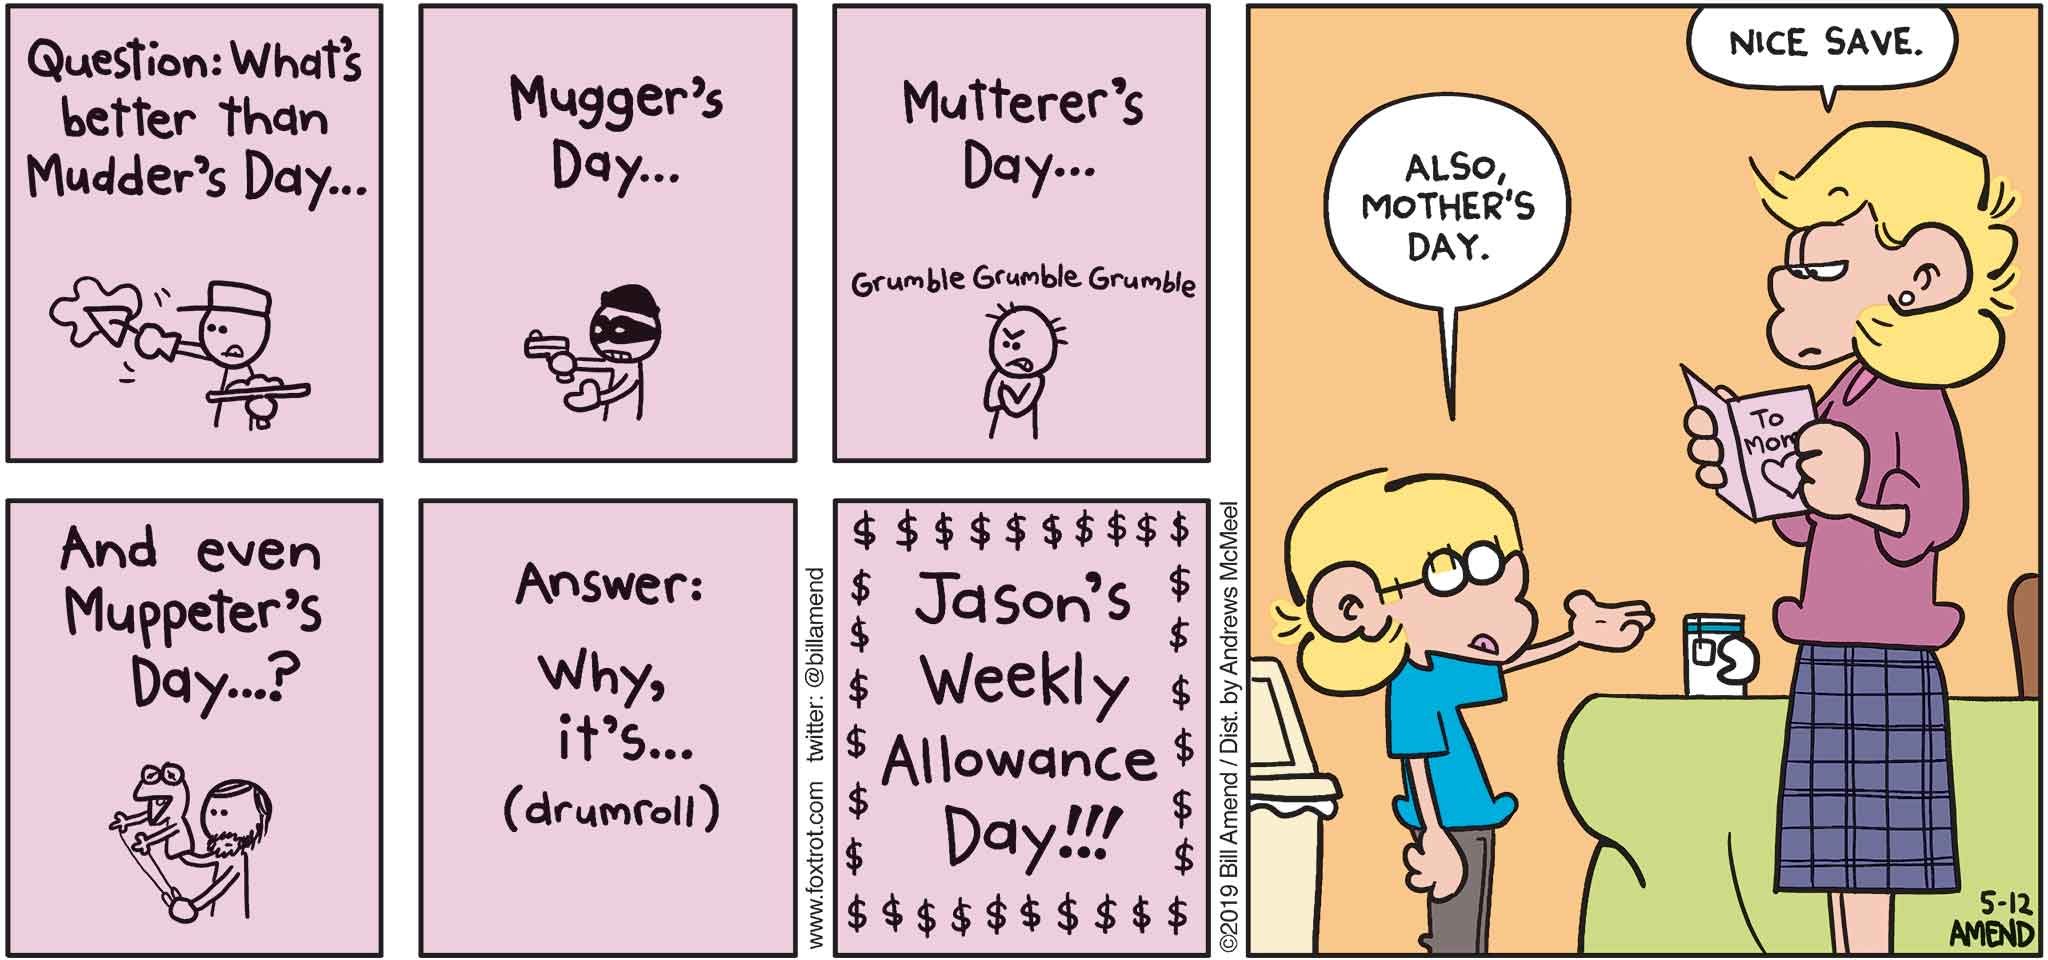 FoxTrot by Bill Amend - "Mudder's Day" published May 12, 2019 - Jason's card: Question: What's better than Mudder's Day... Mugger's Day... Mutterer's Day... And even Muppeter's Day...? Answer: Why, it's (drumroll) Jason's Weekly Allowance Day!!! Jason: Also, Mother's Day. Andy: Nice save.